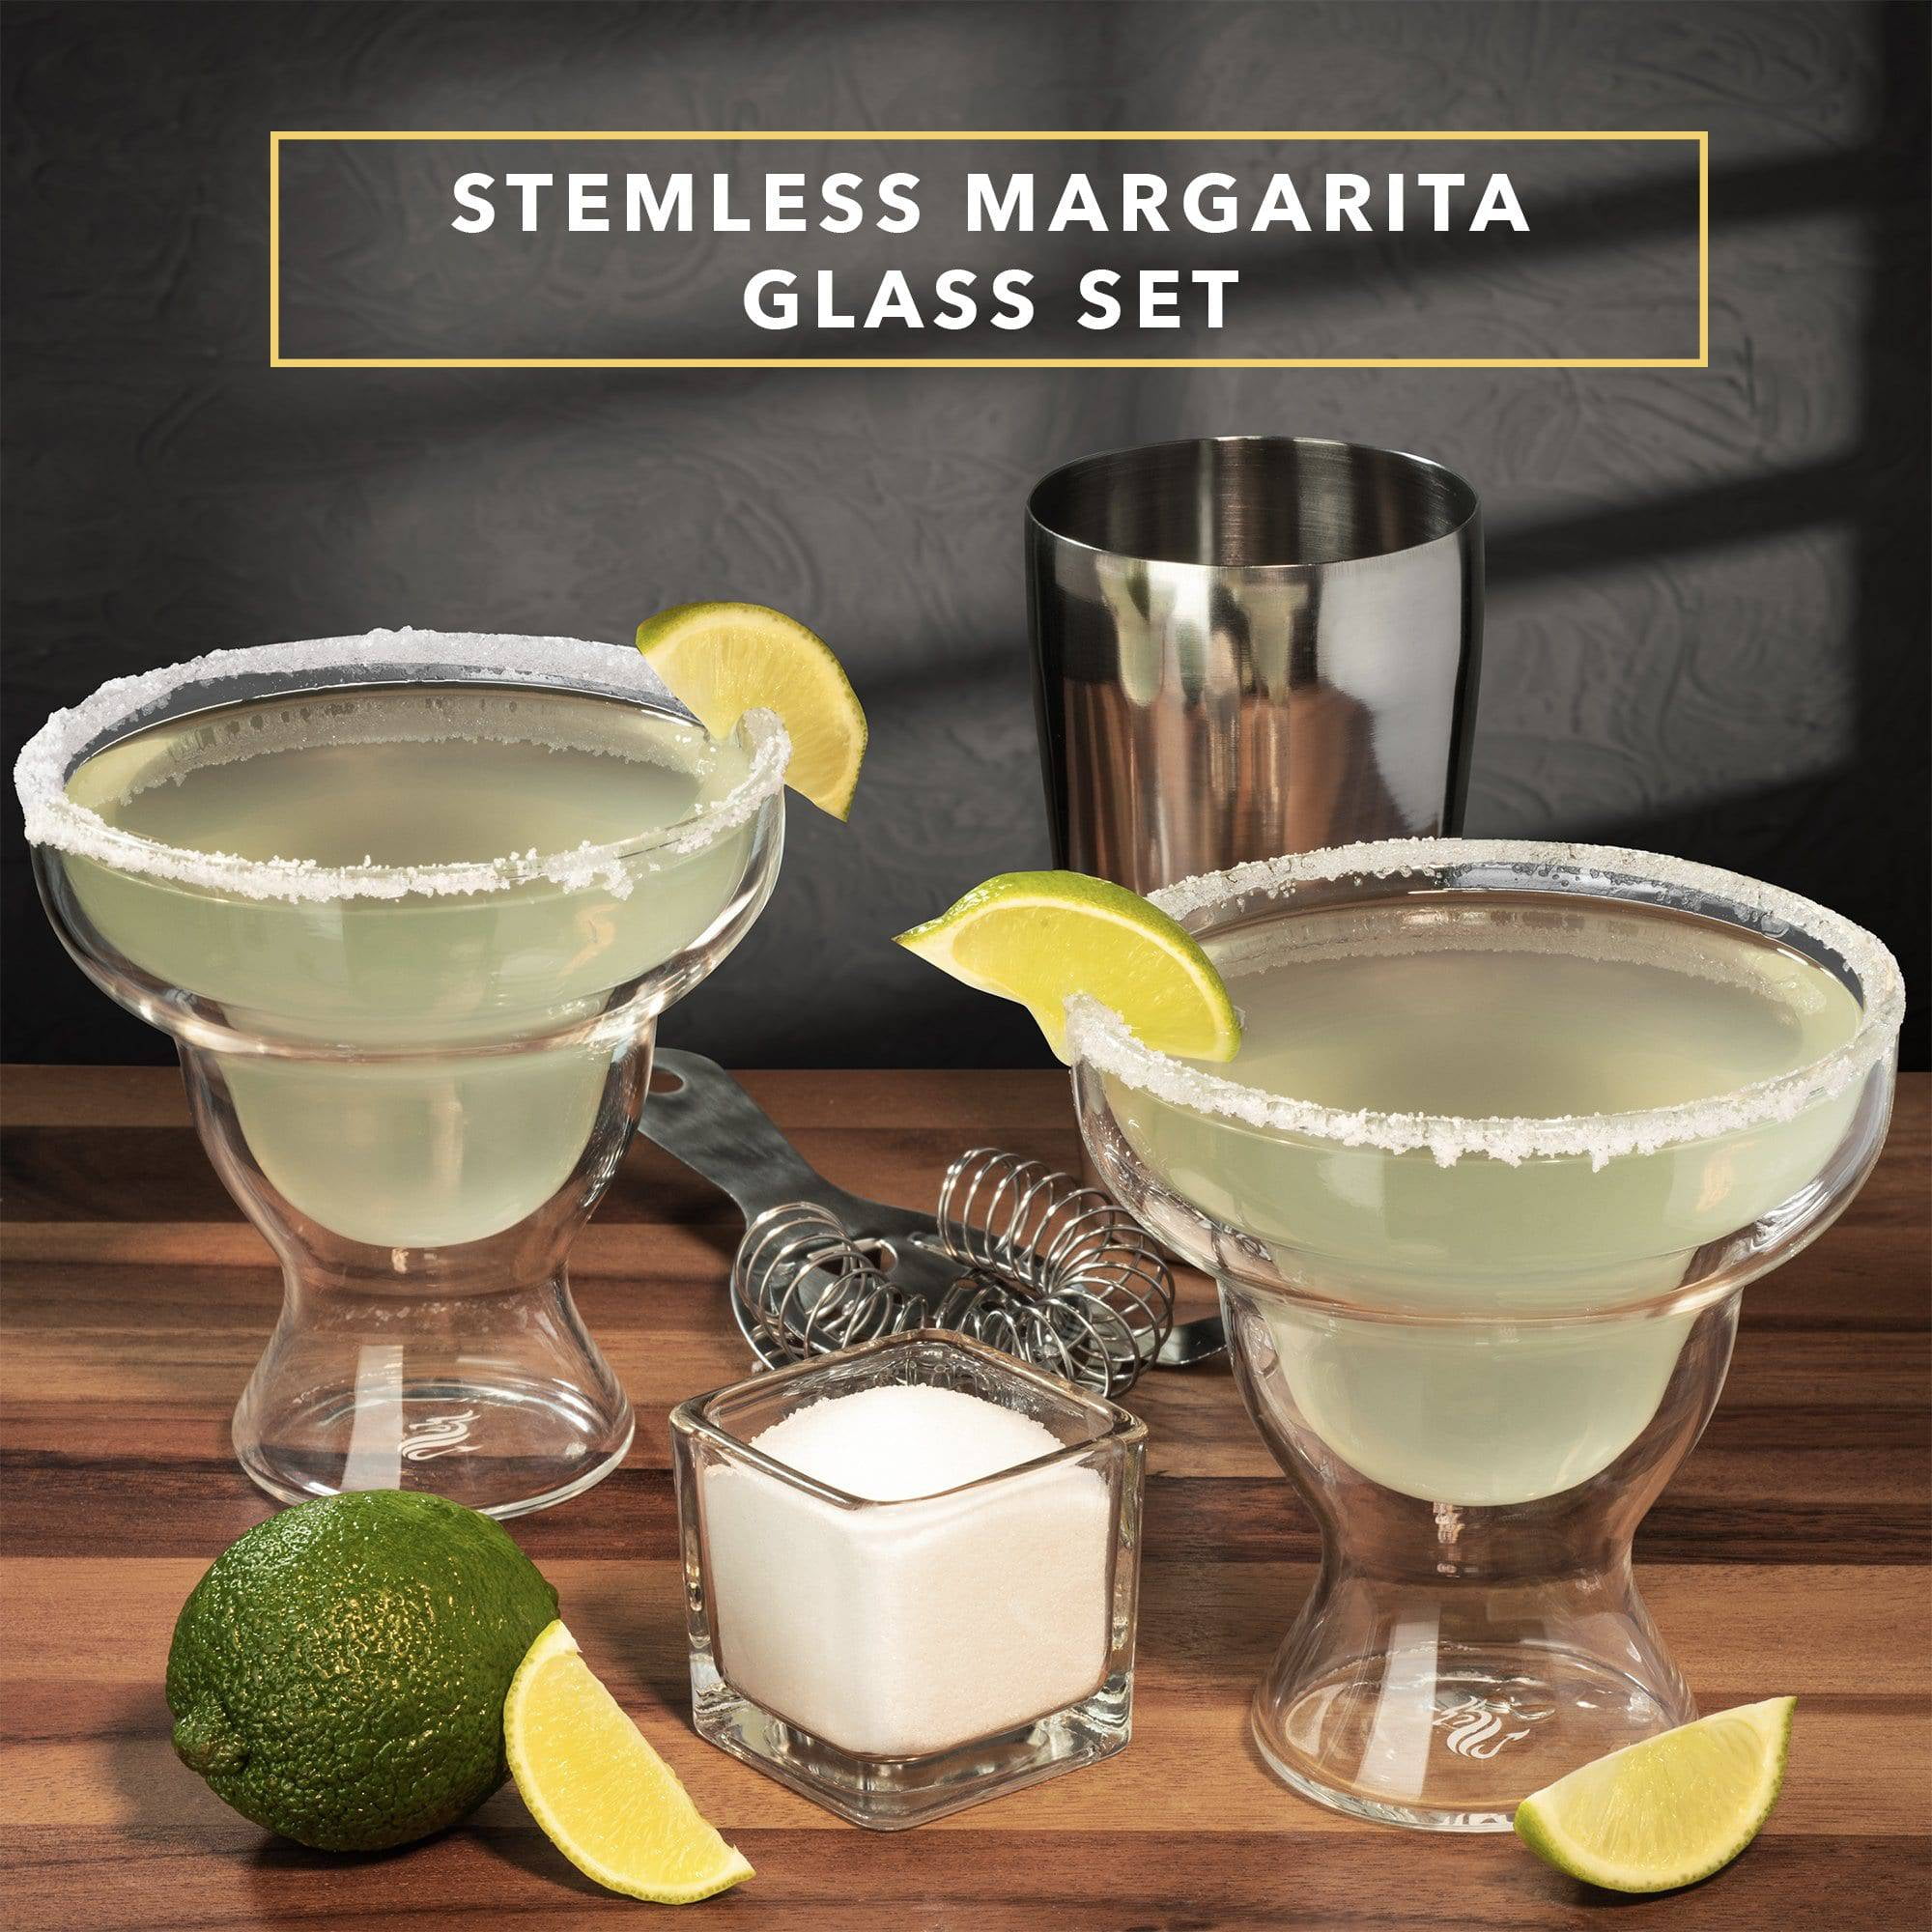 Double Wall Classic Margarita Glasses, Unique Shaped Insulated Barware,  High Quality and Freezer Safe, Great Gift for Mixed Drinks, 12-ounce 